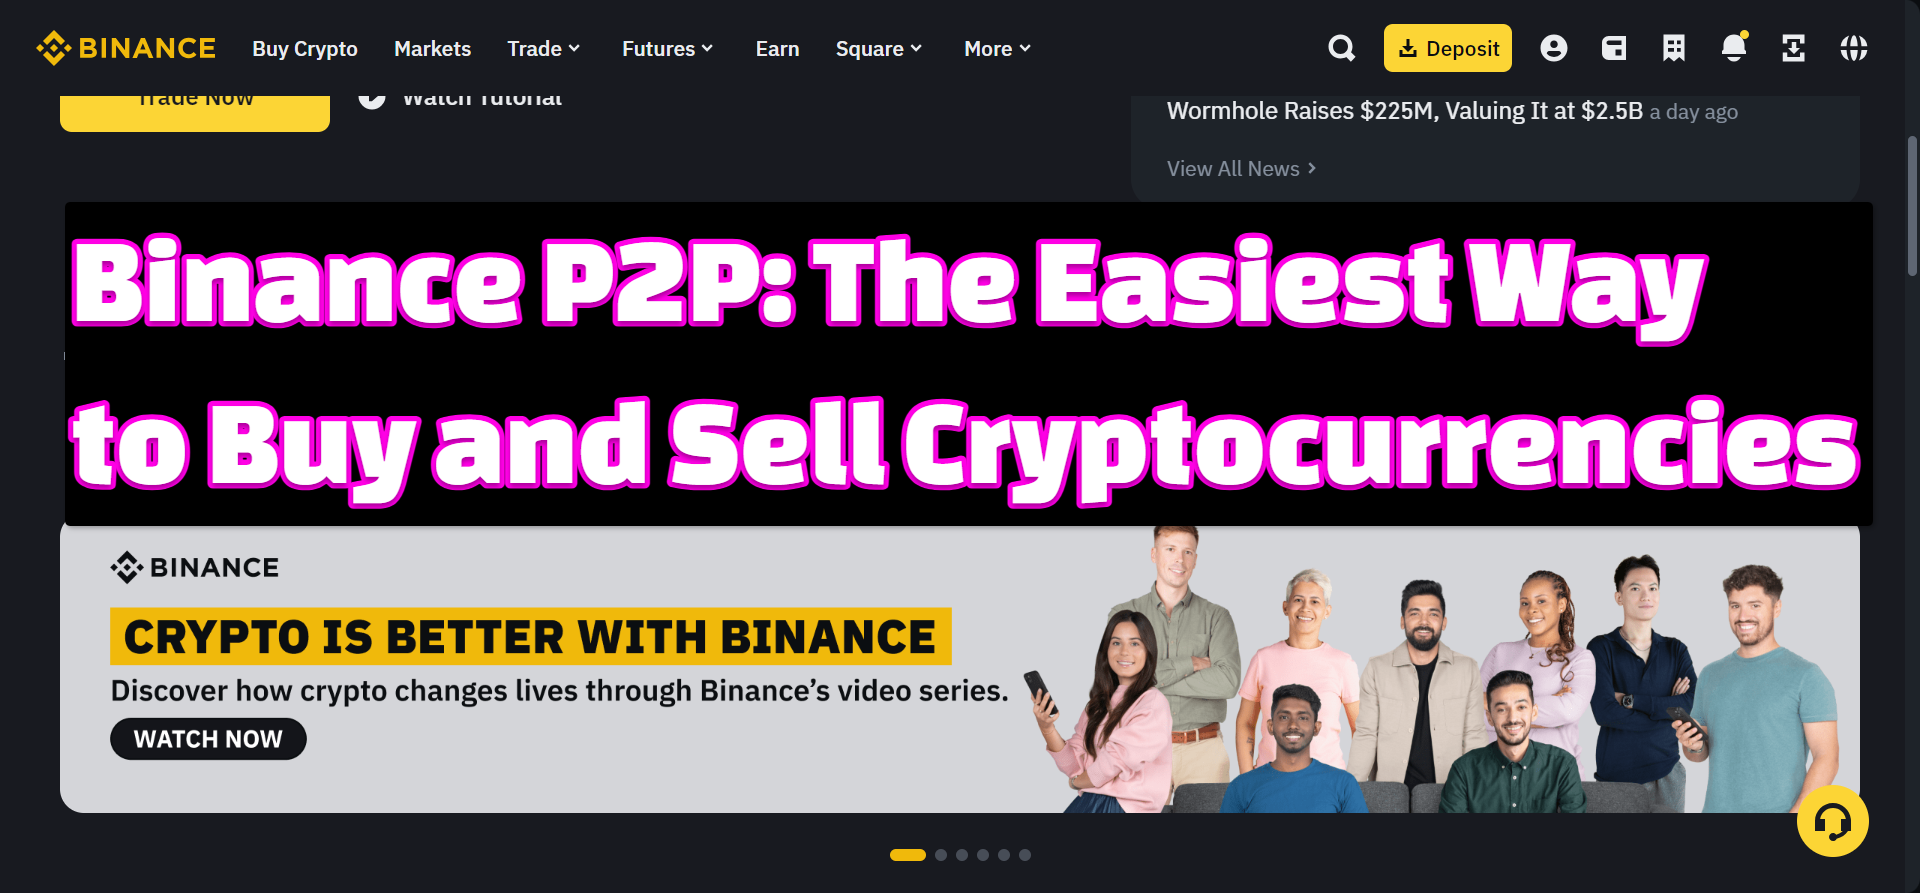 Binance Cryptocurrency Exchange for Bitcoin Ethereum Altcoins 3 Binance P2P: The Easiest Way to Buy and Sell Cryptocurrencies